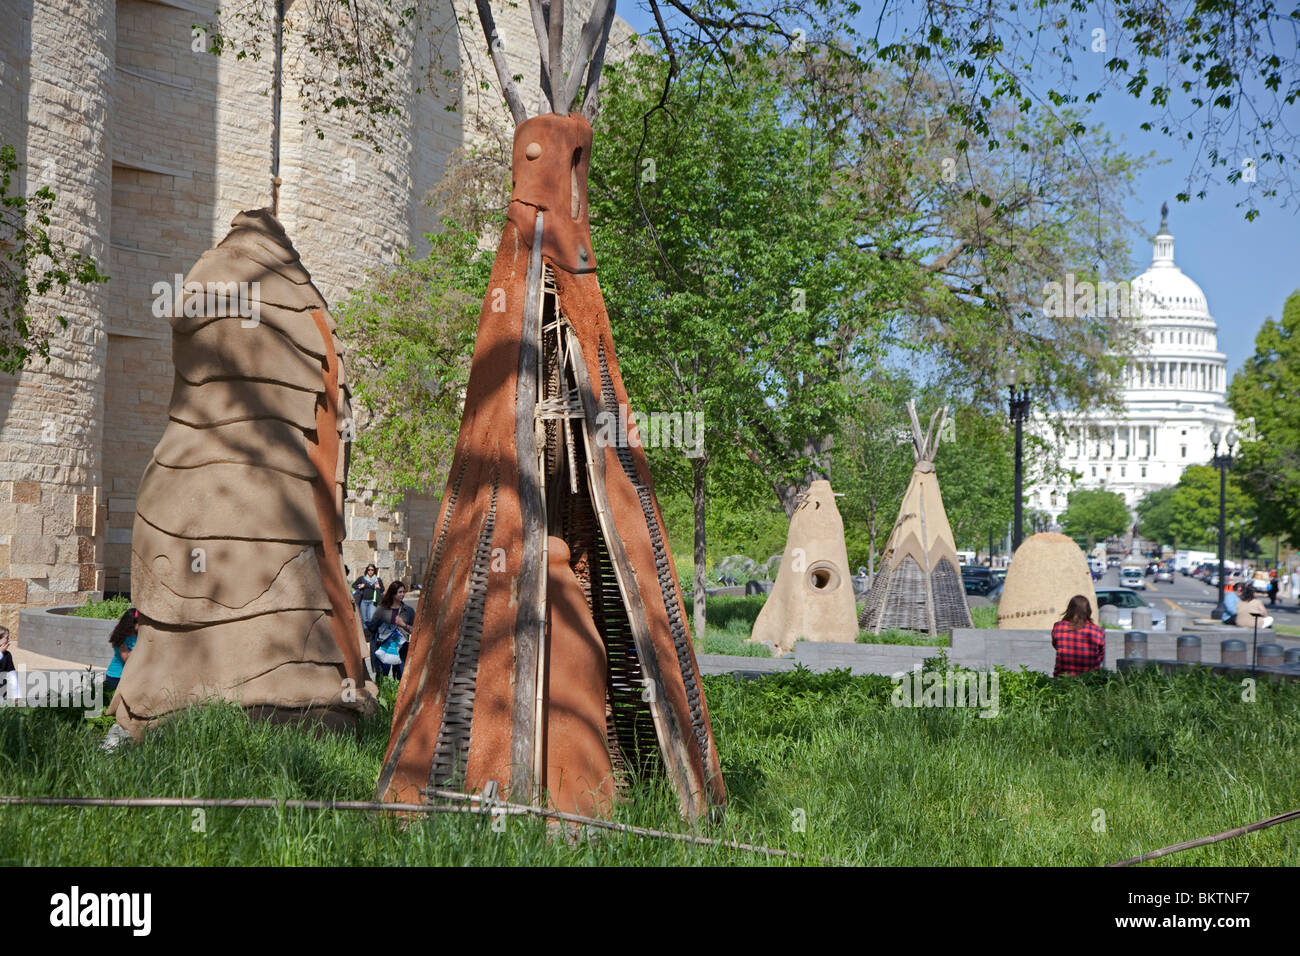 Washington, DC - The National Museum of the American Indian. Stock Photo